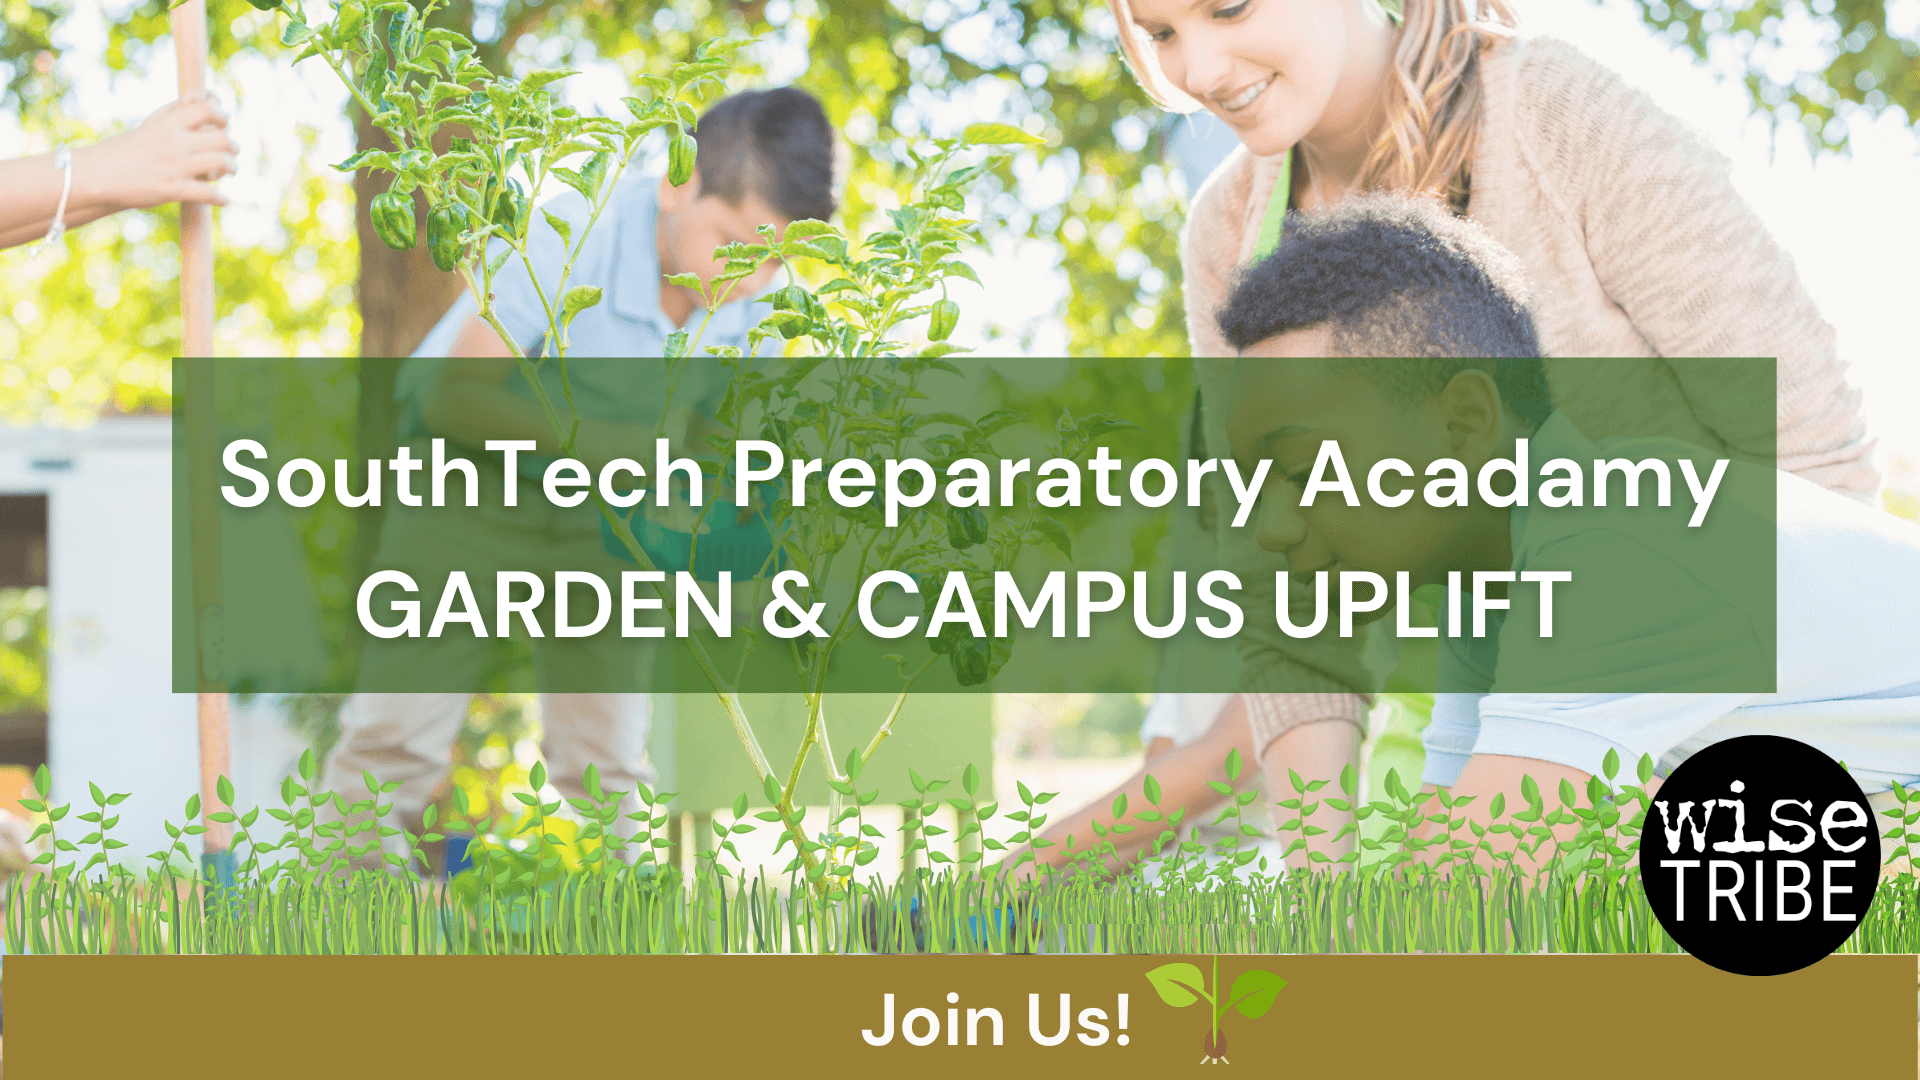 Volunteer with us at SouthTech Preparatory Academy! 